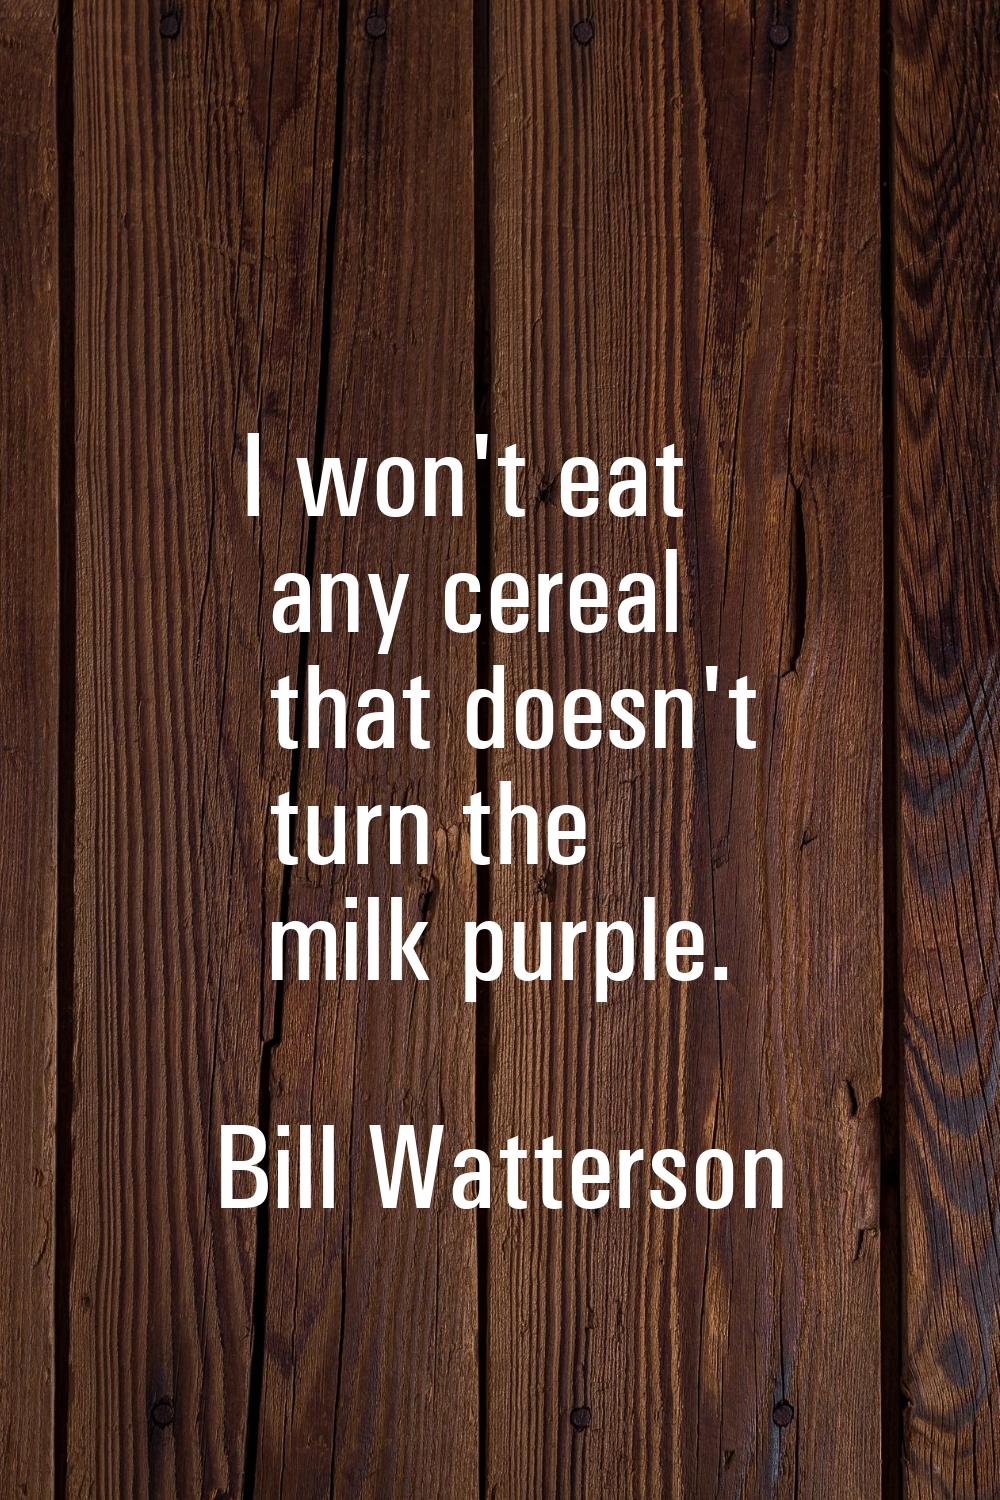 I won't eat any cereal that doesn't turn the milk purple.